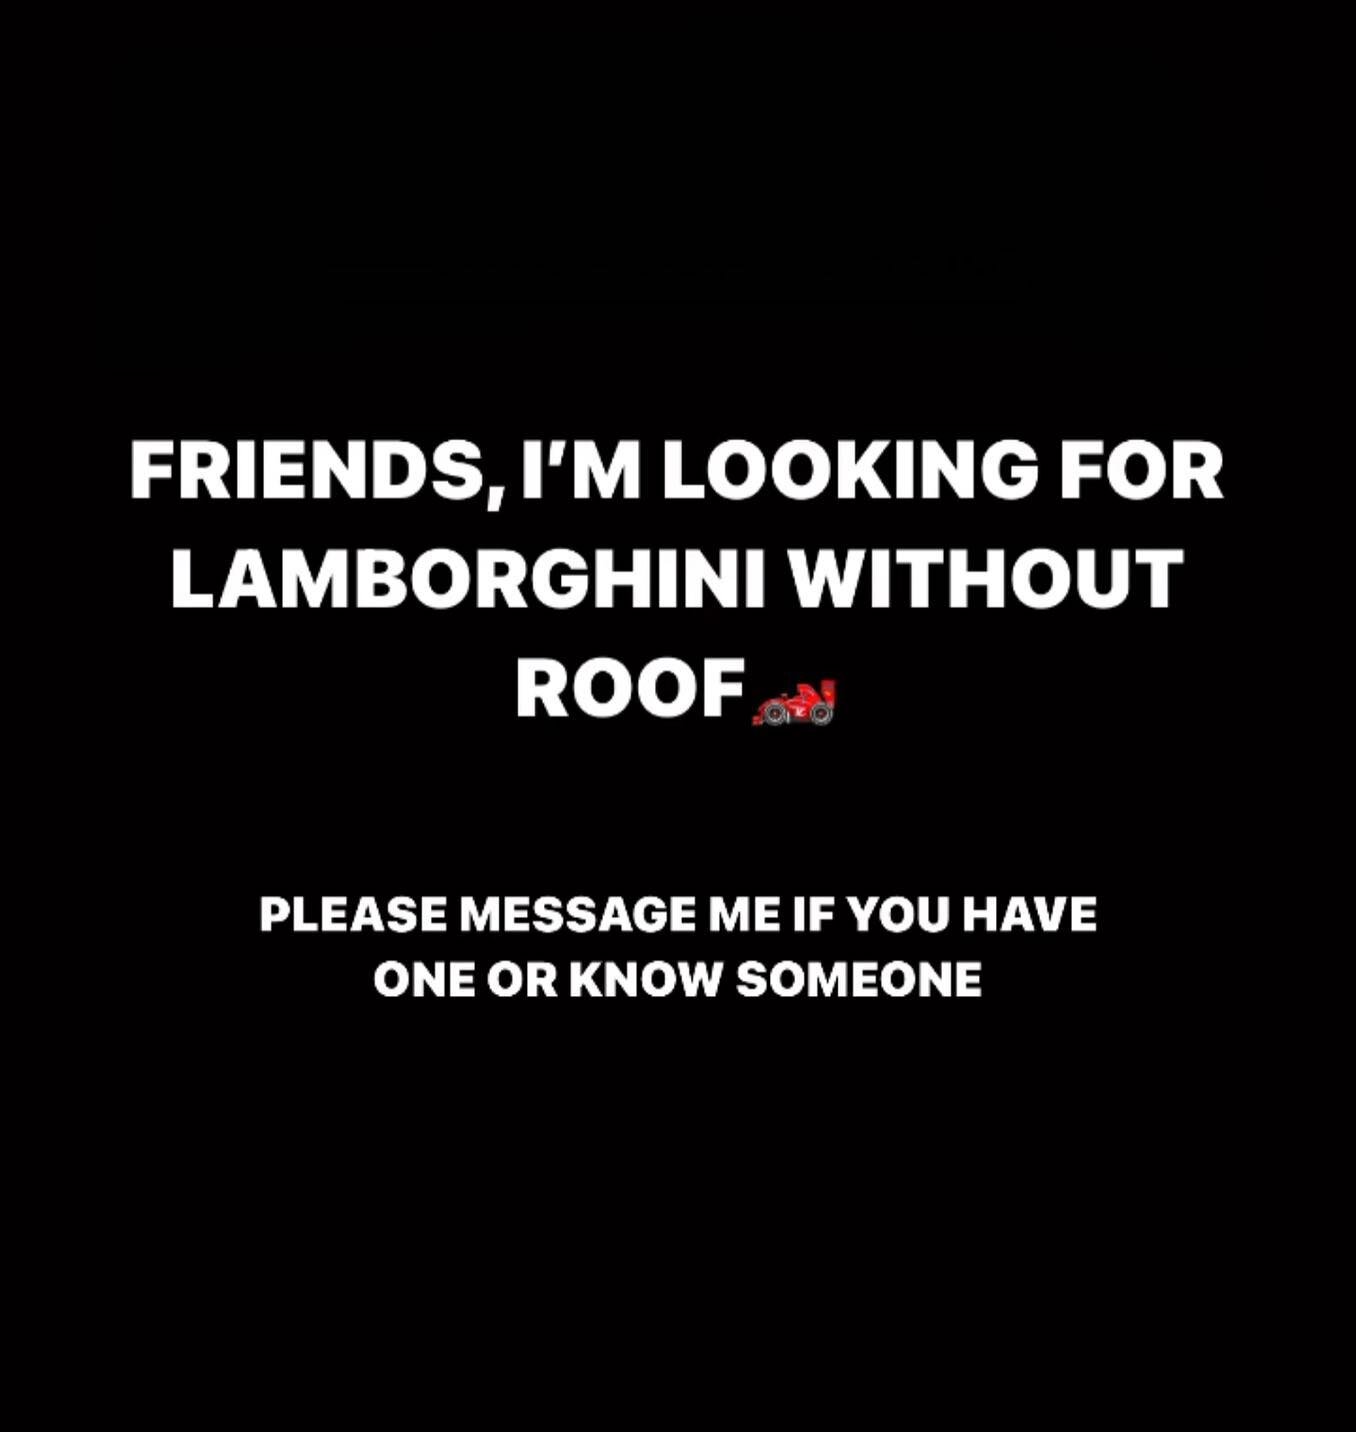 Hey everyone! 
I&rsquo;m looking for a Lamborghini without roof for a Barbie promo video. If you have one or you know someone who has one please message me! 🏎️

Thank you! 

_
_
_
_
#chicagovideographer #chicagophotographer #chicagoartist #chicago #